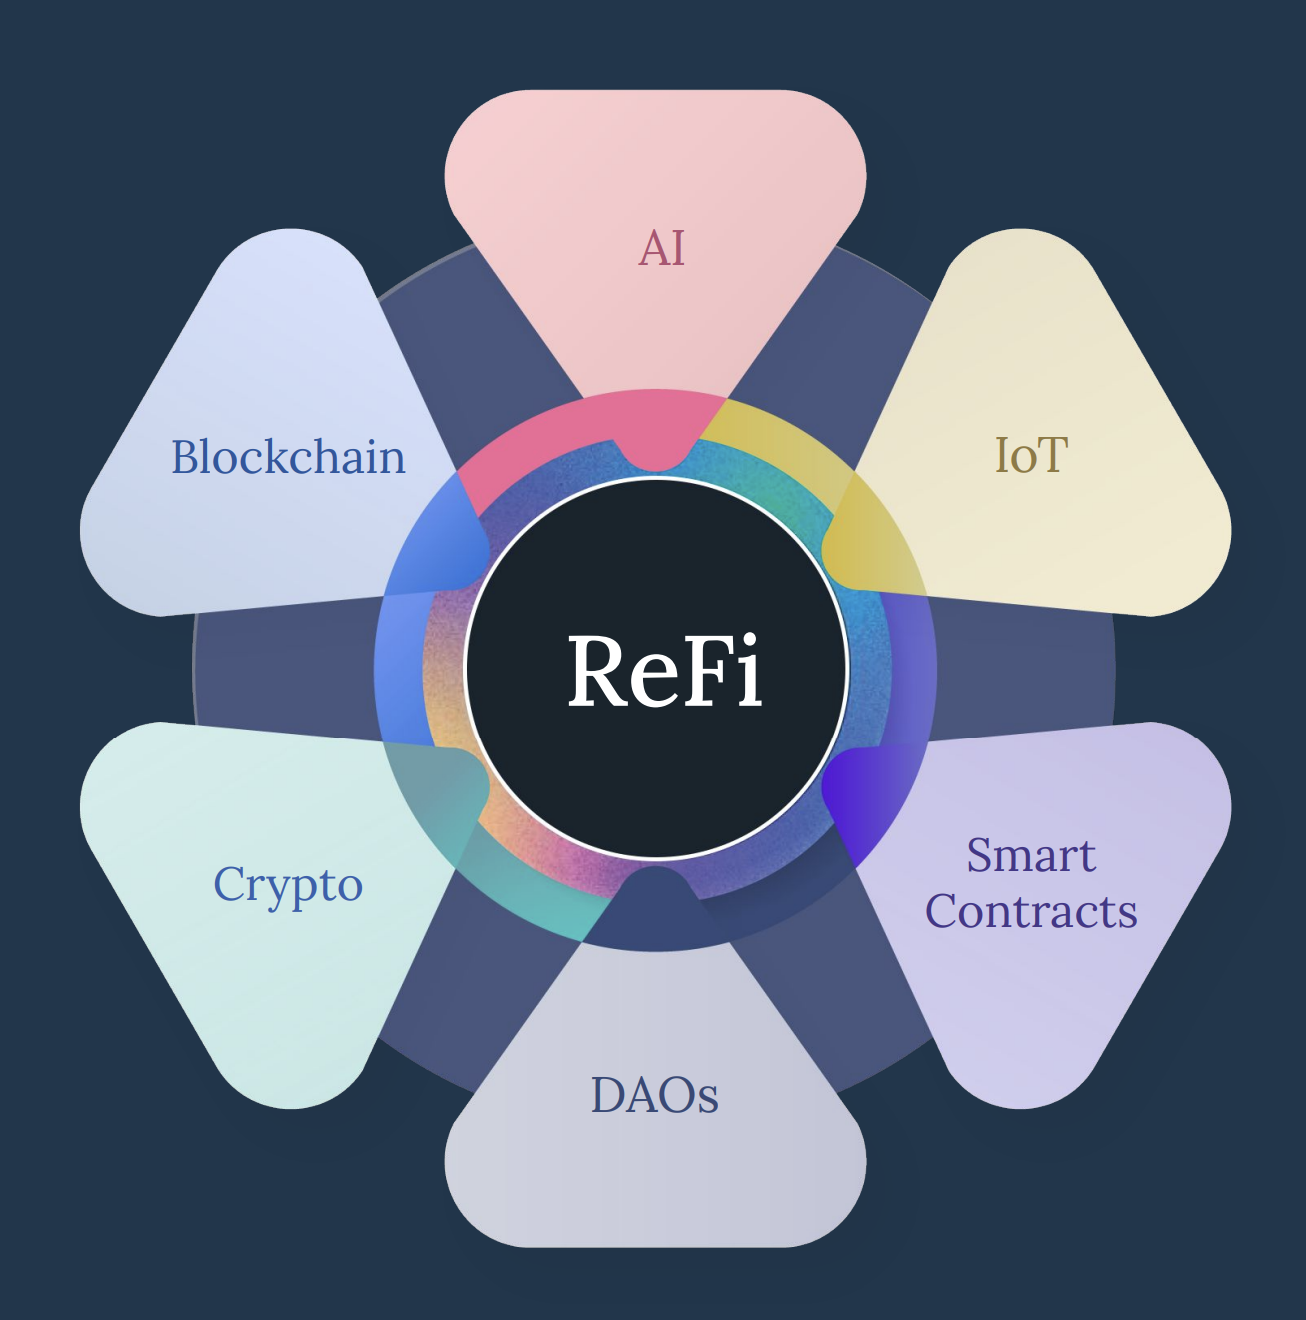 As mentioned at the beginning of this chapter, emerging trends and opportunities in green crypto broadly fall under the ReFi, DeSci, or DePIN banners, with ReFi being predominant. “...ReFi can be described as Web3-powered ecological and social impact. In other words, taking the available Web3 solutions—blockchain, cryptocurrency, smart contracts, and DAOs—and combining them with other modern technologies to build solutions that address our systemic issues.” Source: Graphic (https://carboncopy.news/reports/The%20State%20of%20ReFi%20Report%202024.pdf) by Carbon Copy and ReFiDAO is used under a fair use rationale.